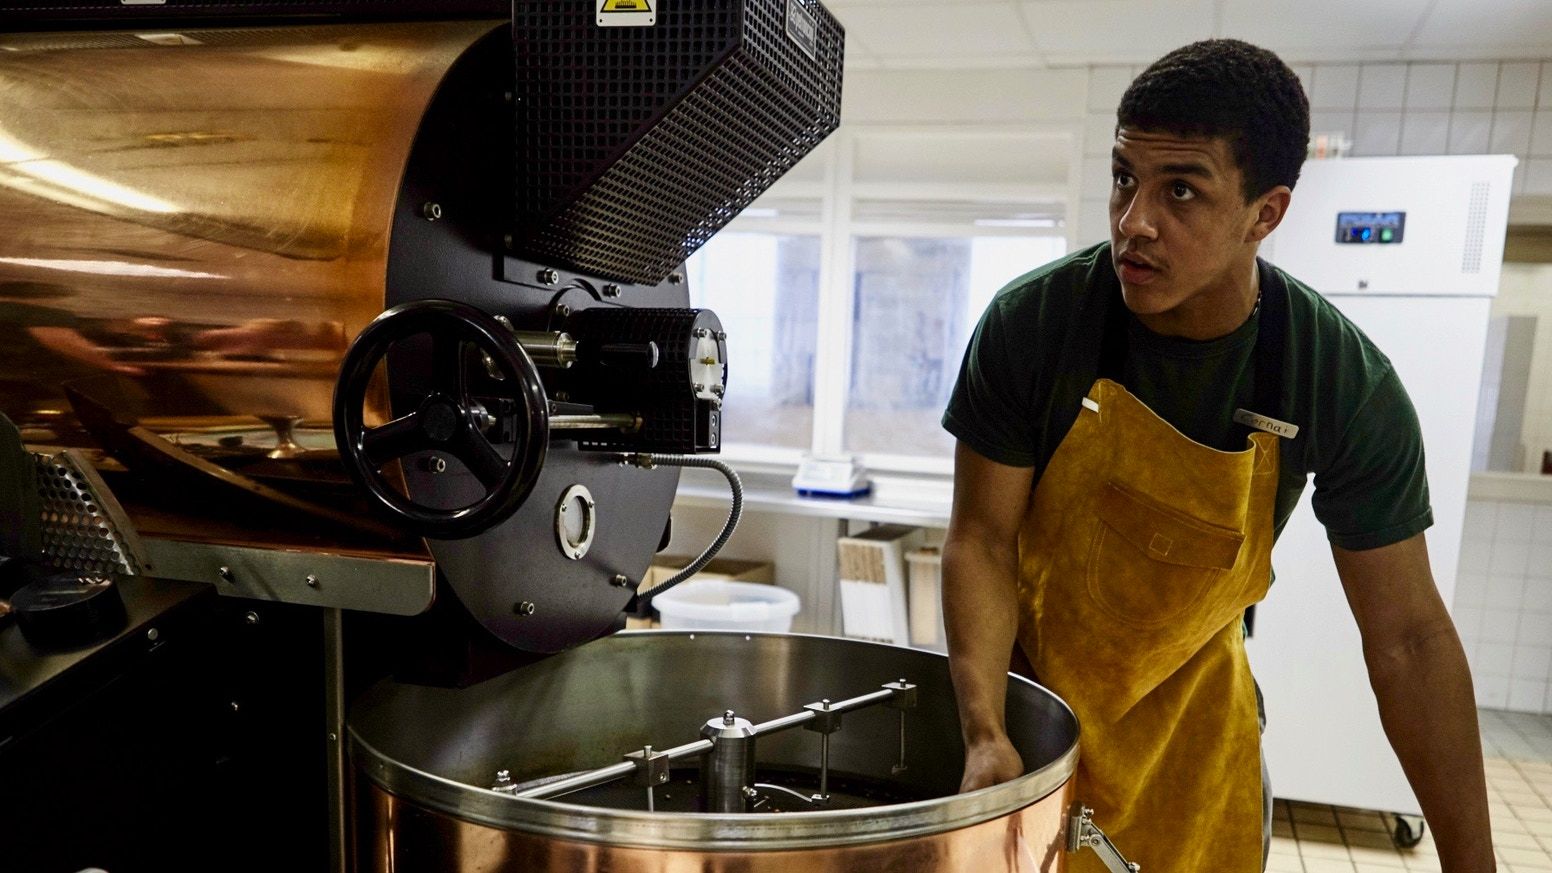 Introducing Redemption Roasters: The World's First Prison-based Coffee Company